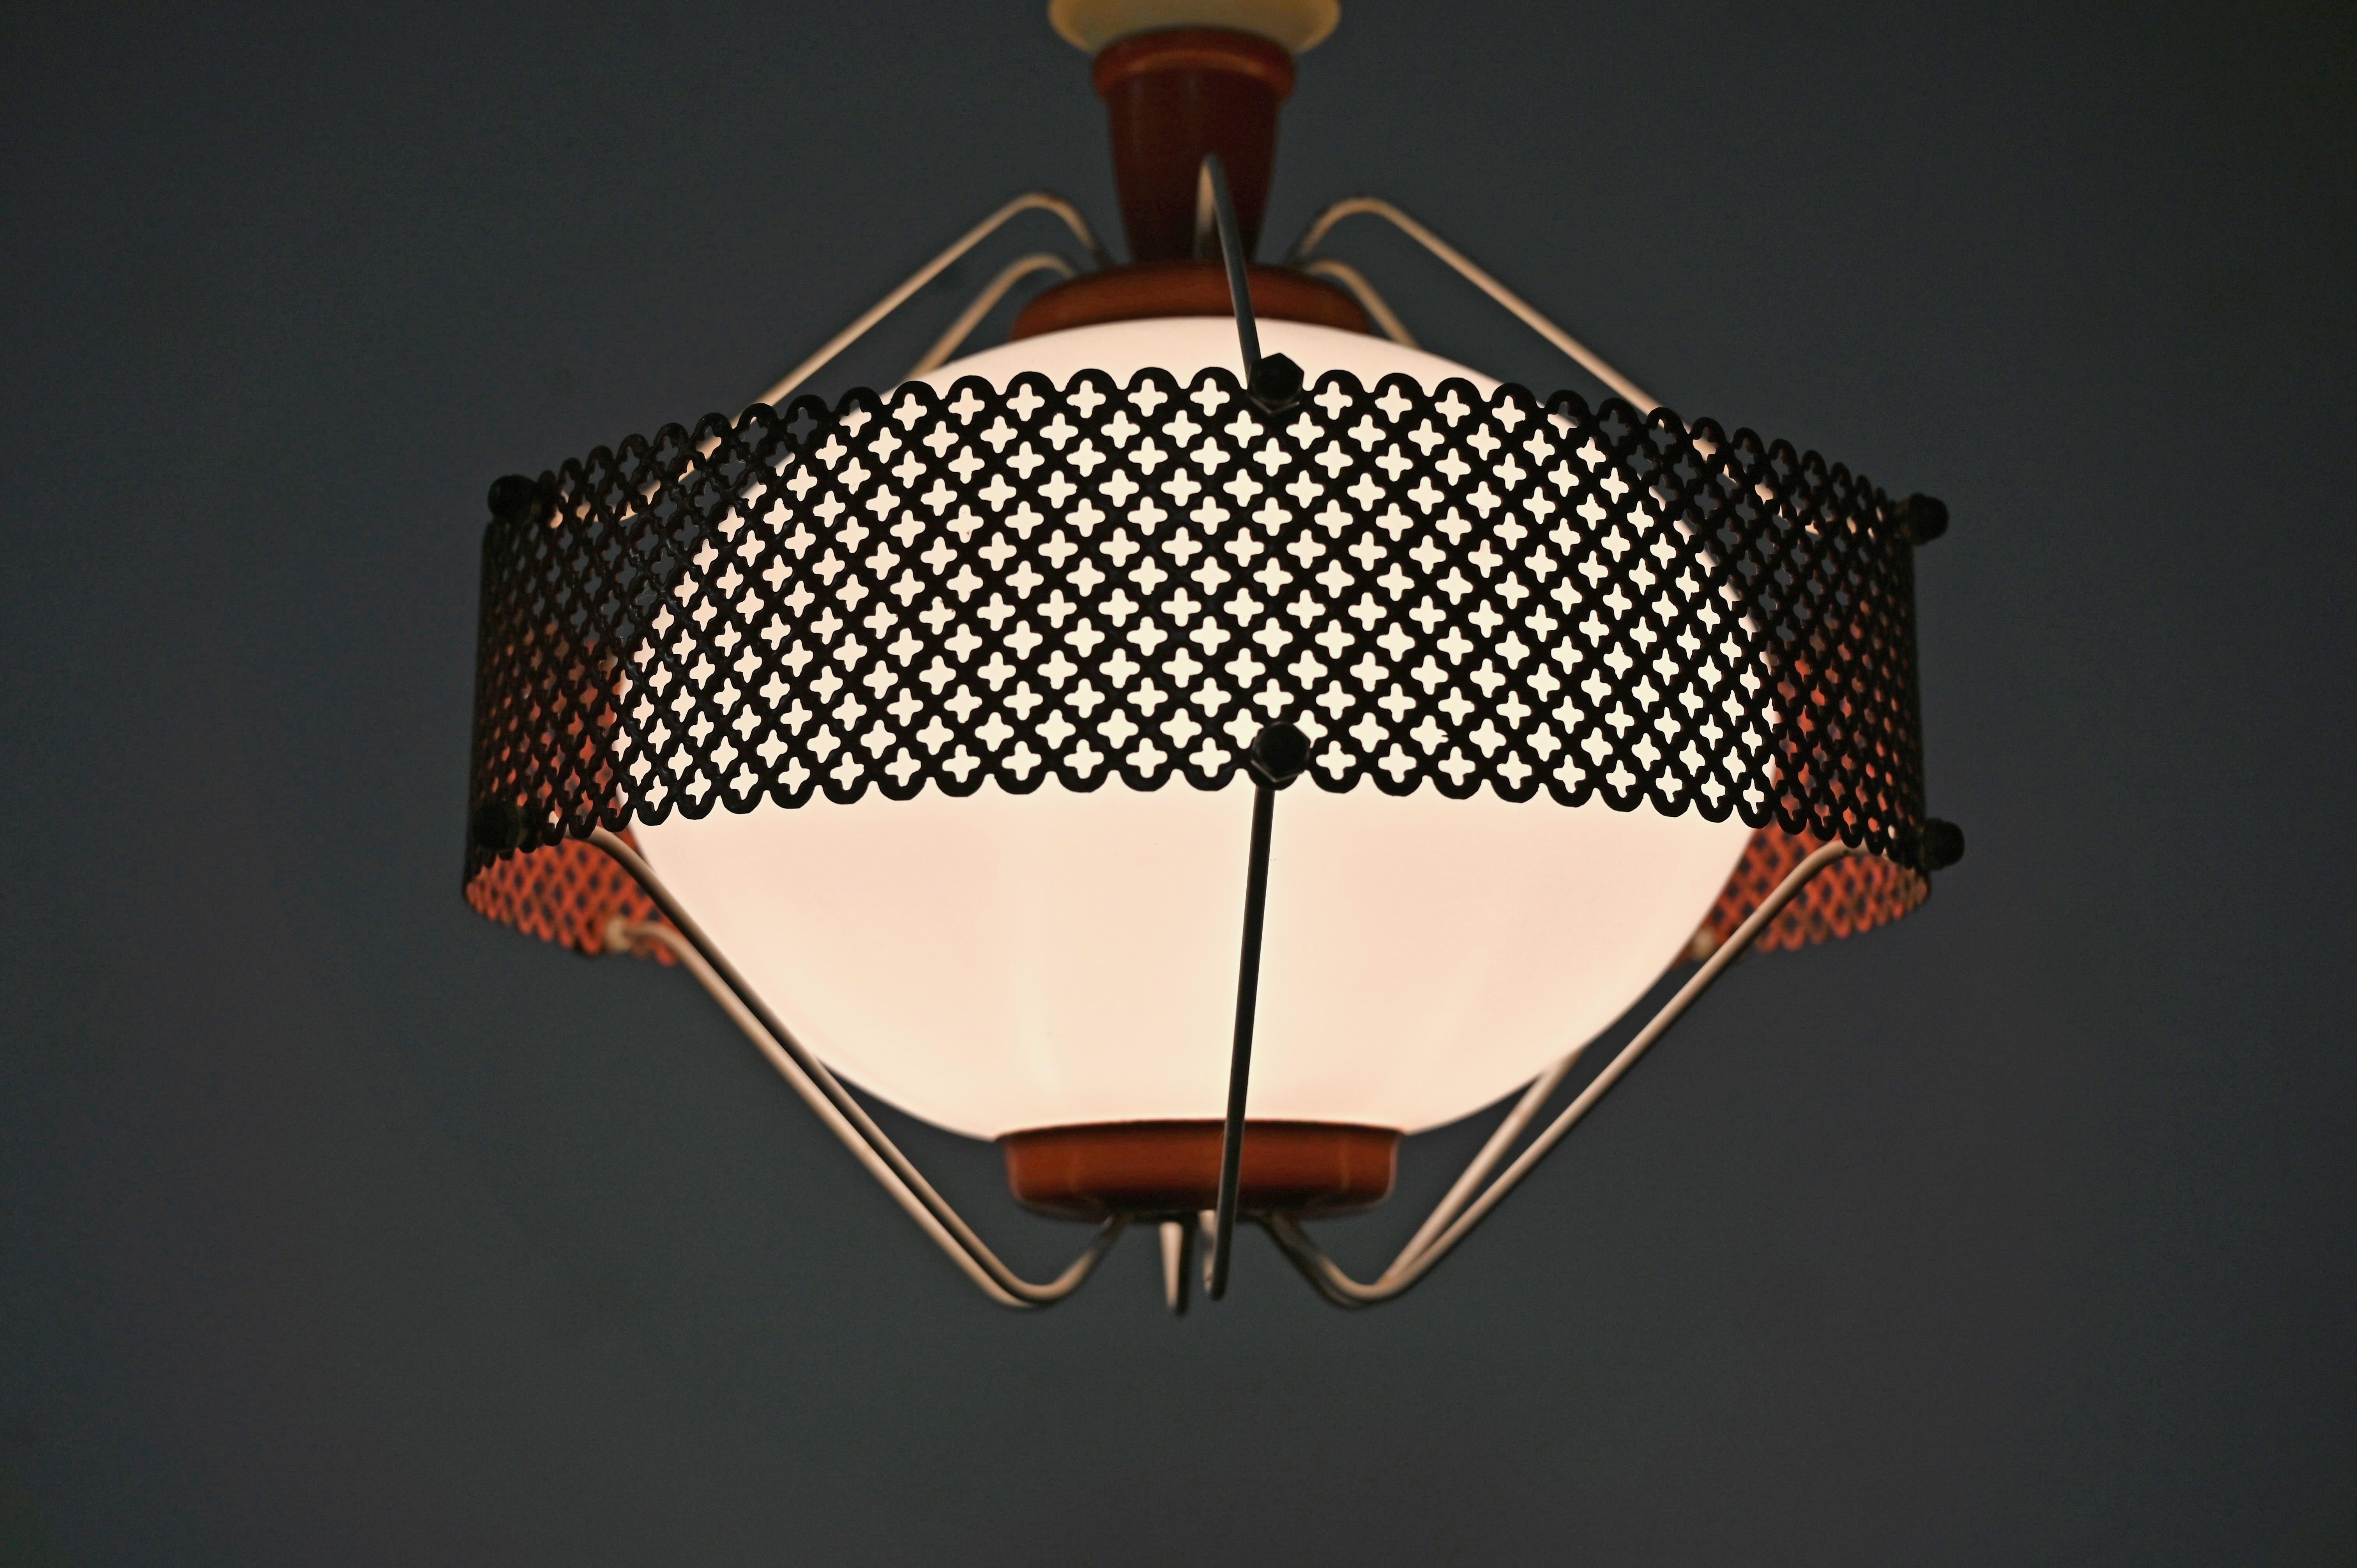 Mathieu Matégot Pendant Lamps in Opal Glass, Red Metal, 1950s French Lighting For Sale 7